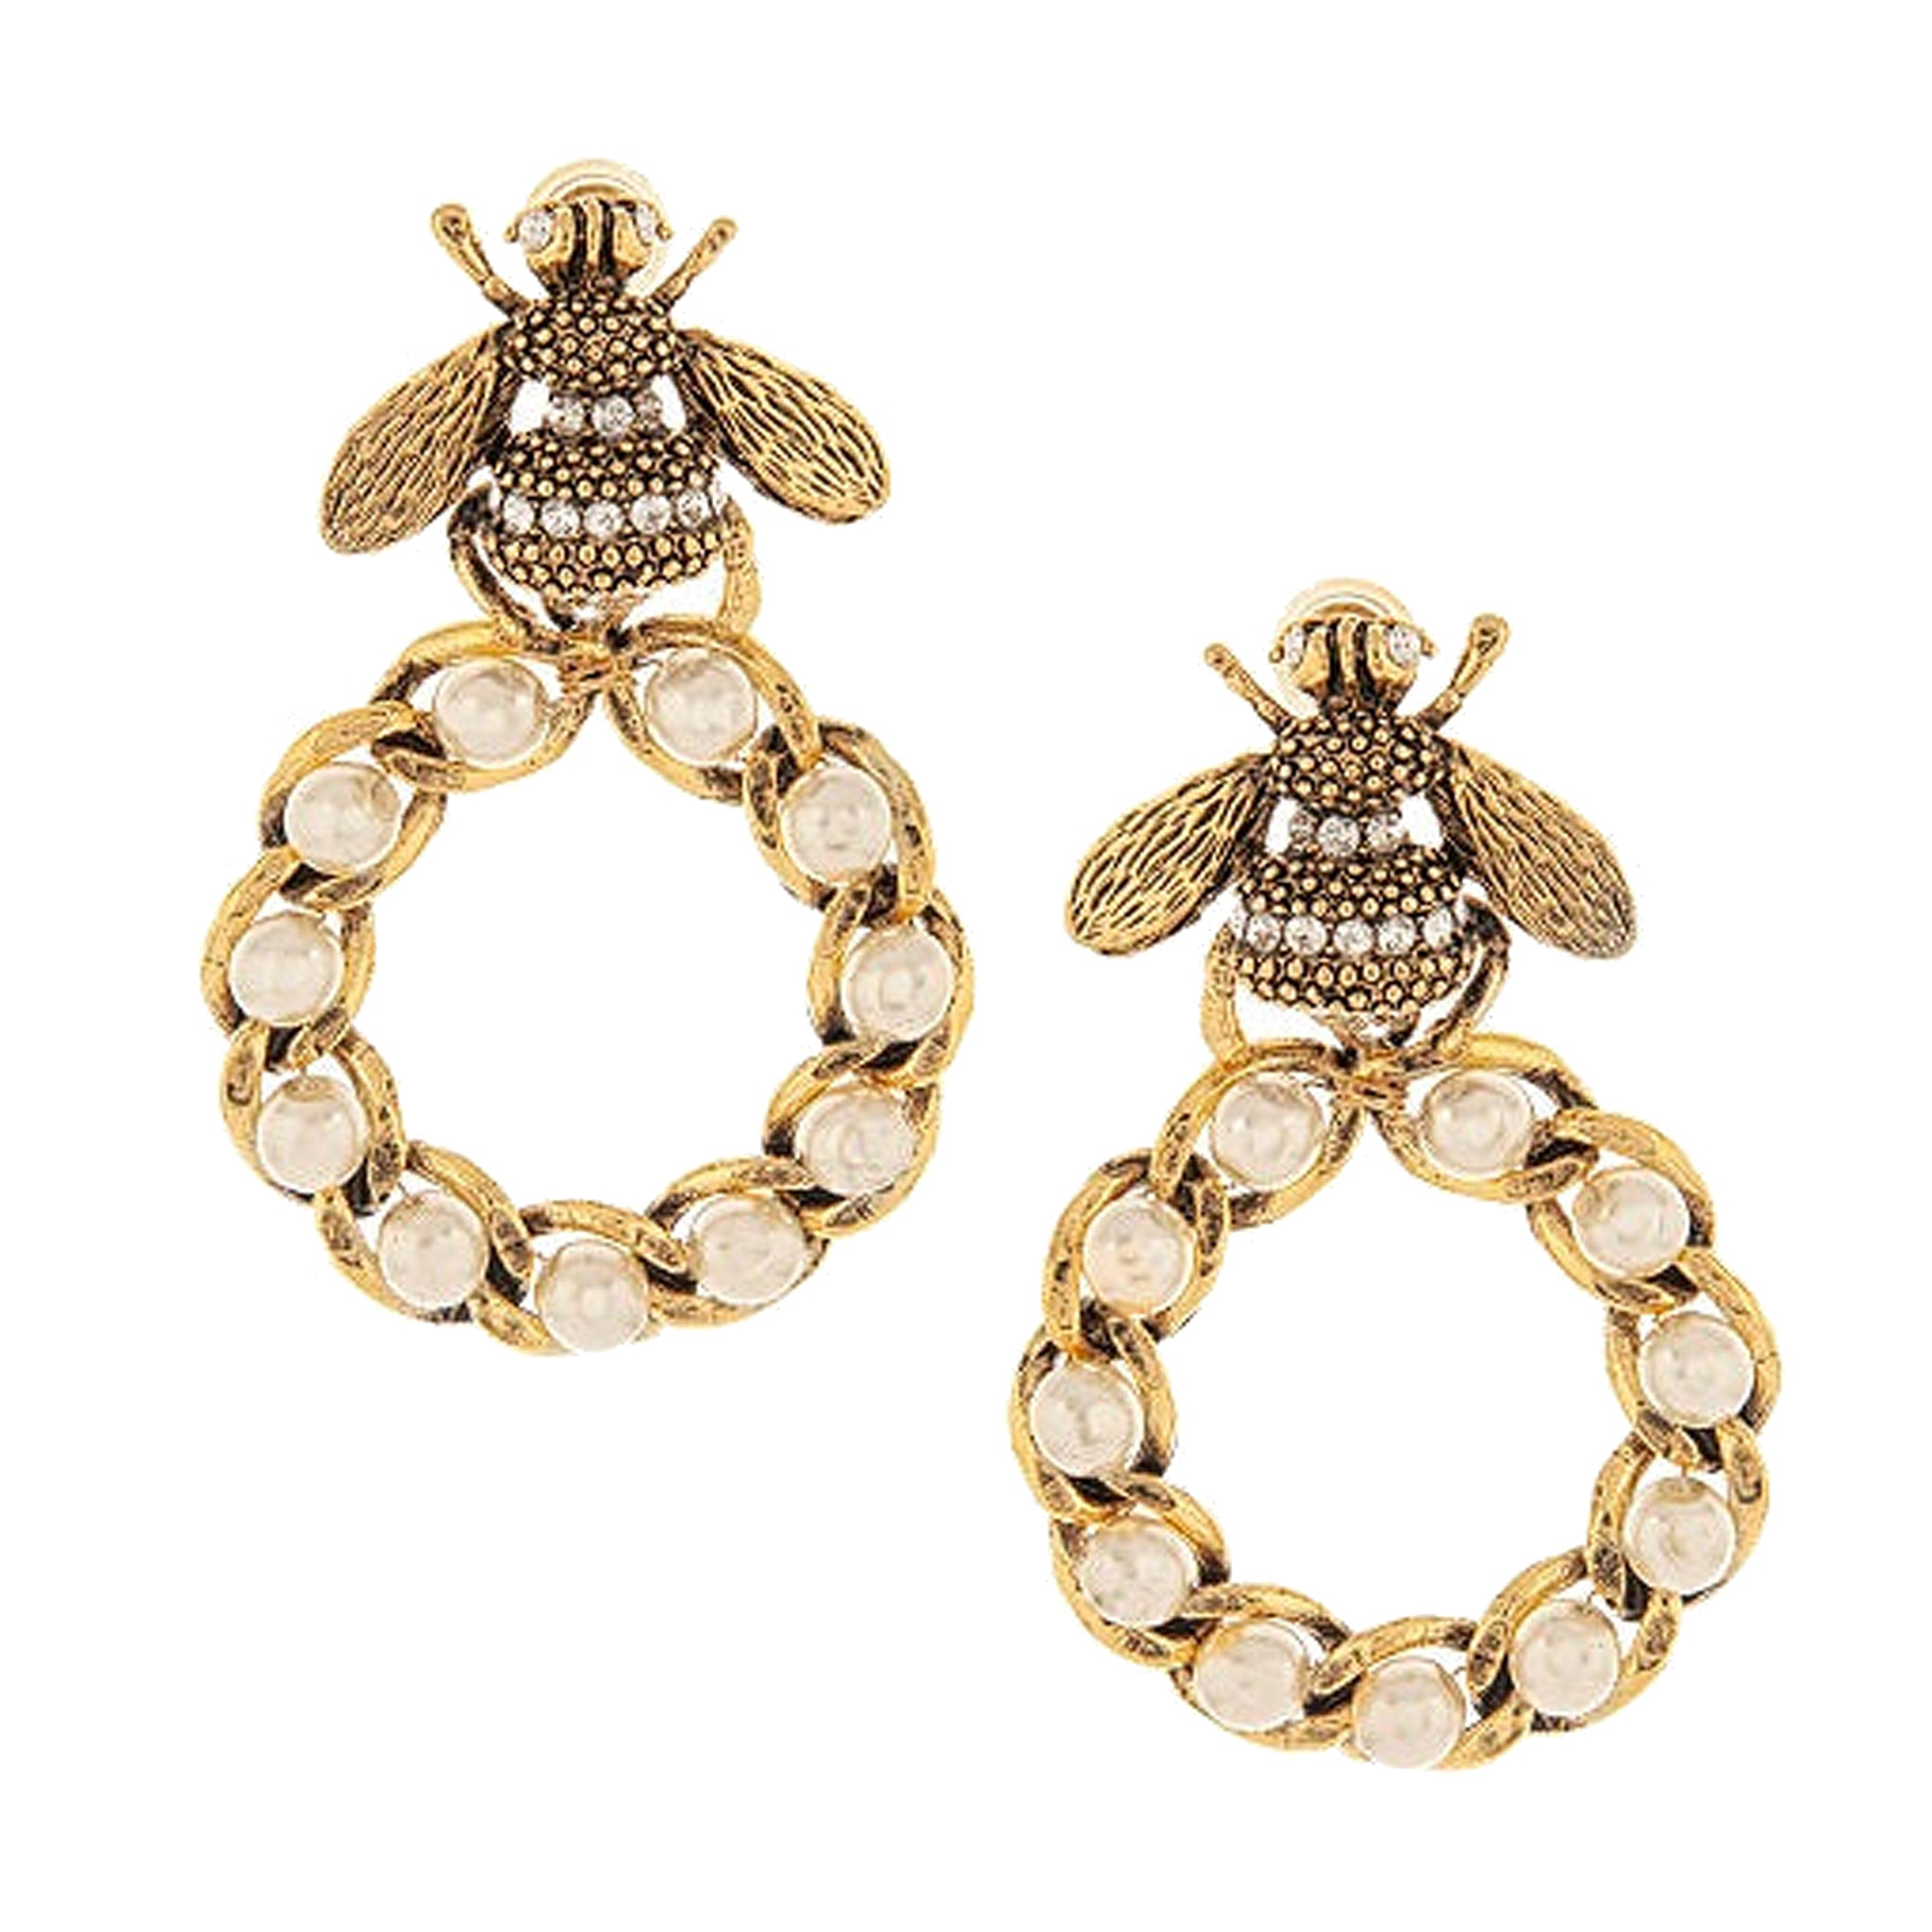 Yochi NY Gigi Bumble Bee Front Facing Pearl Large Hoop Earrings in 22k Gold